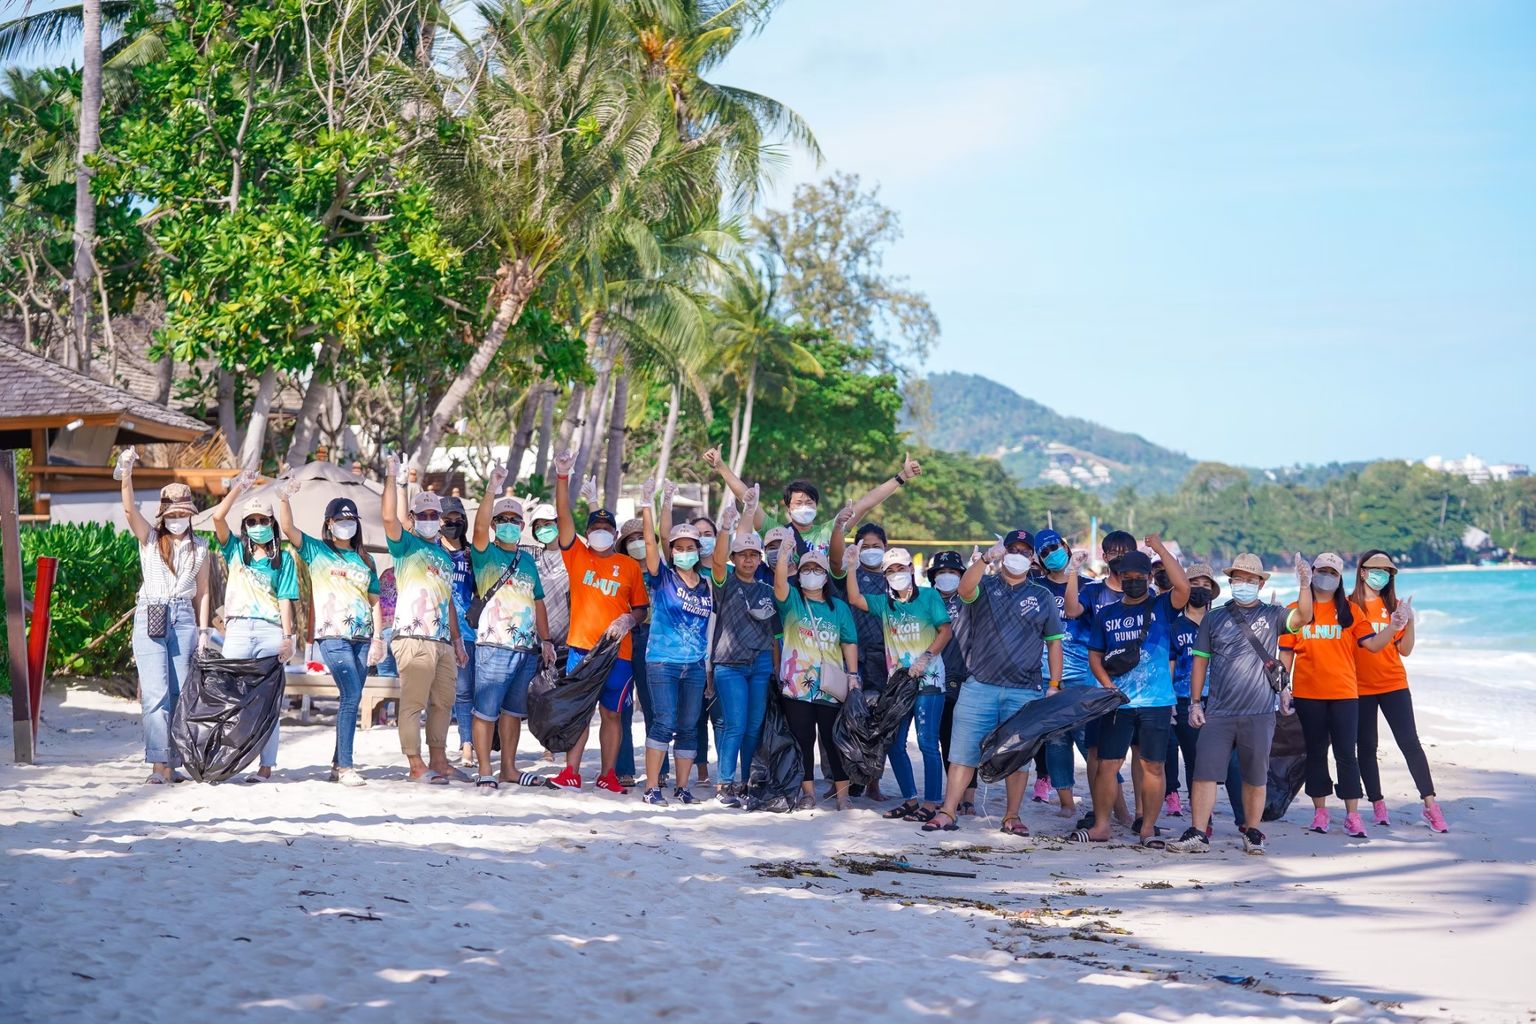 Beach garbage collection activity at Koh Samui District, Surat Thani Province